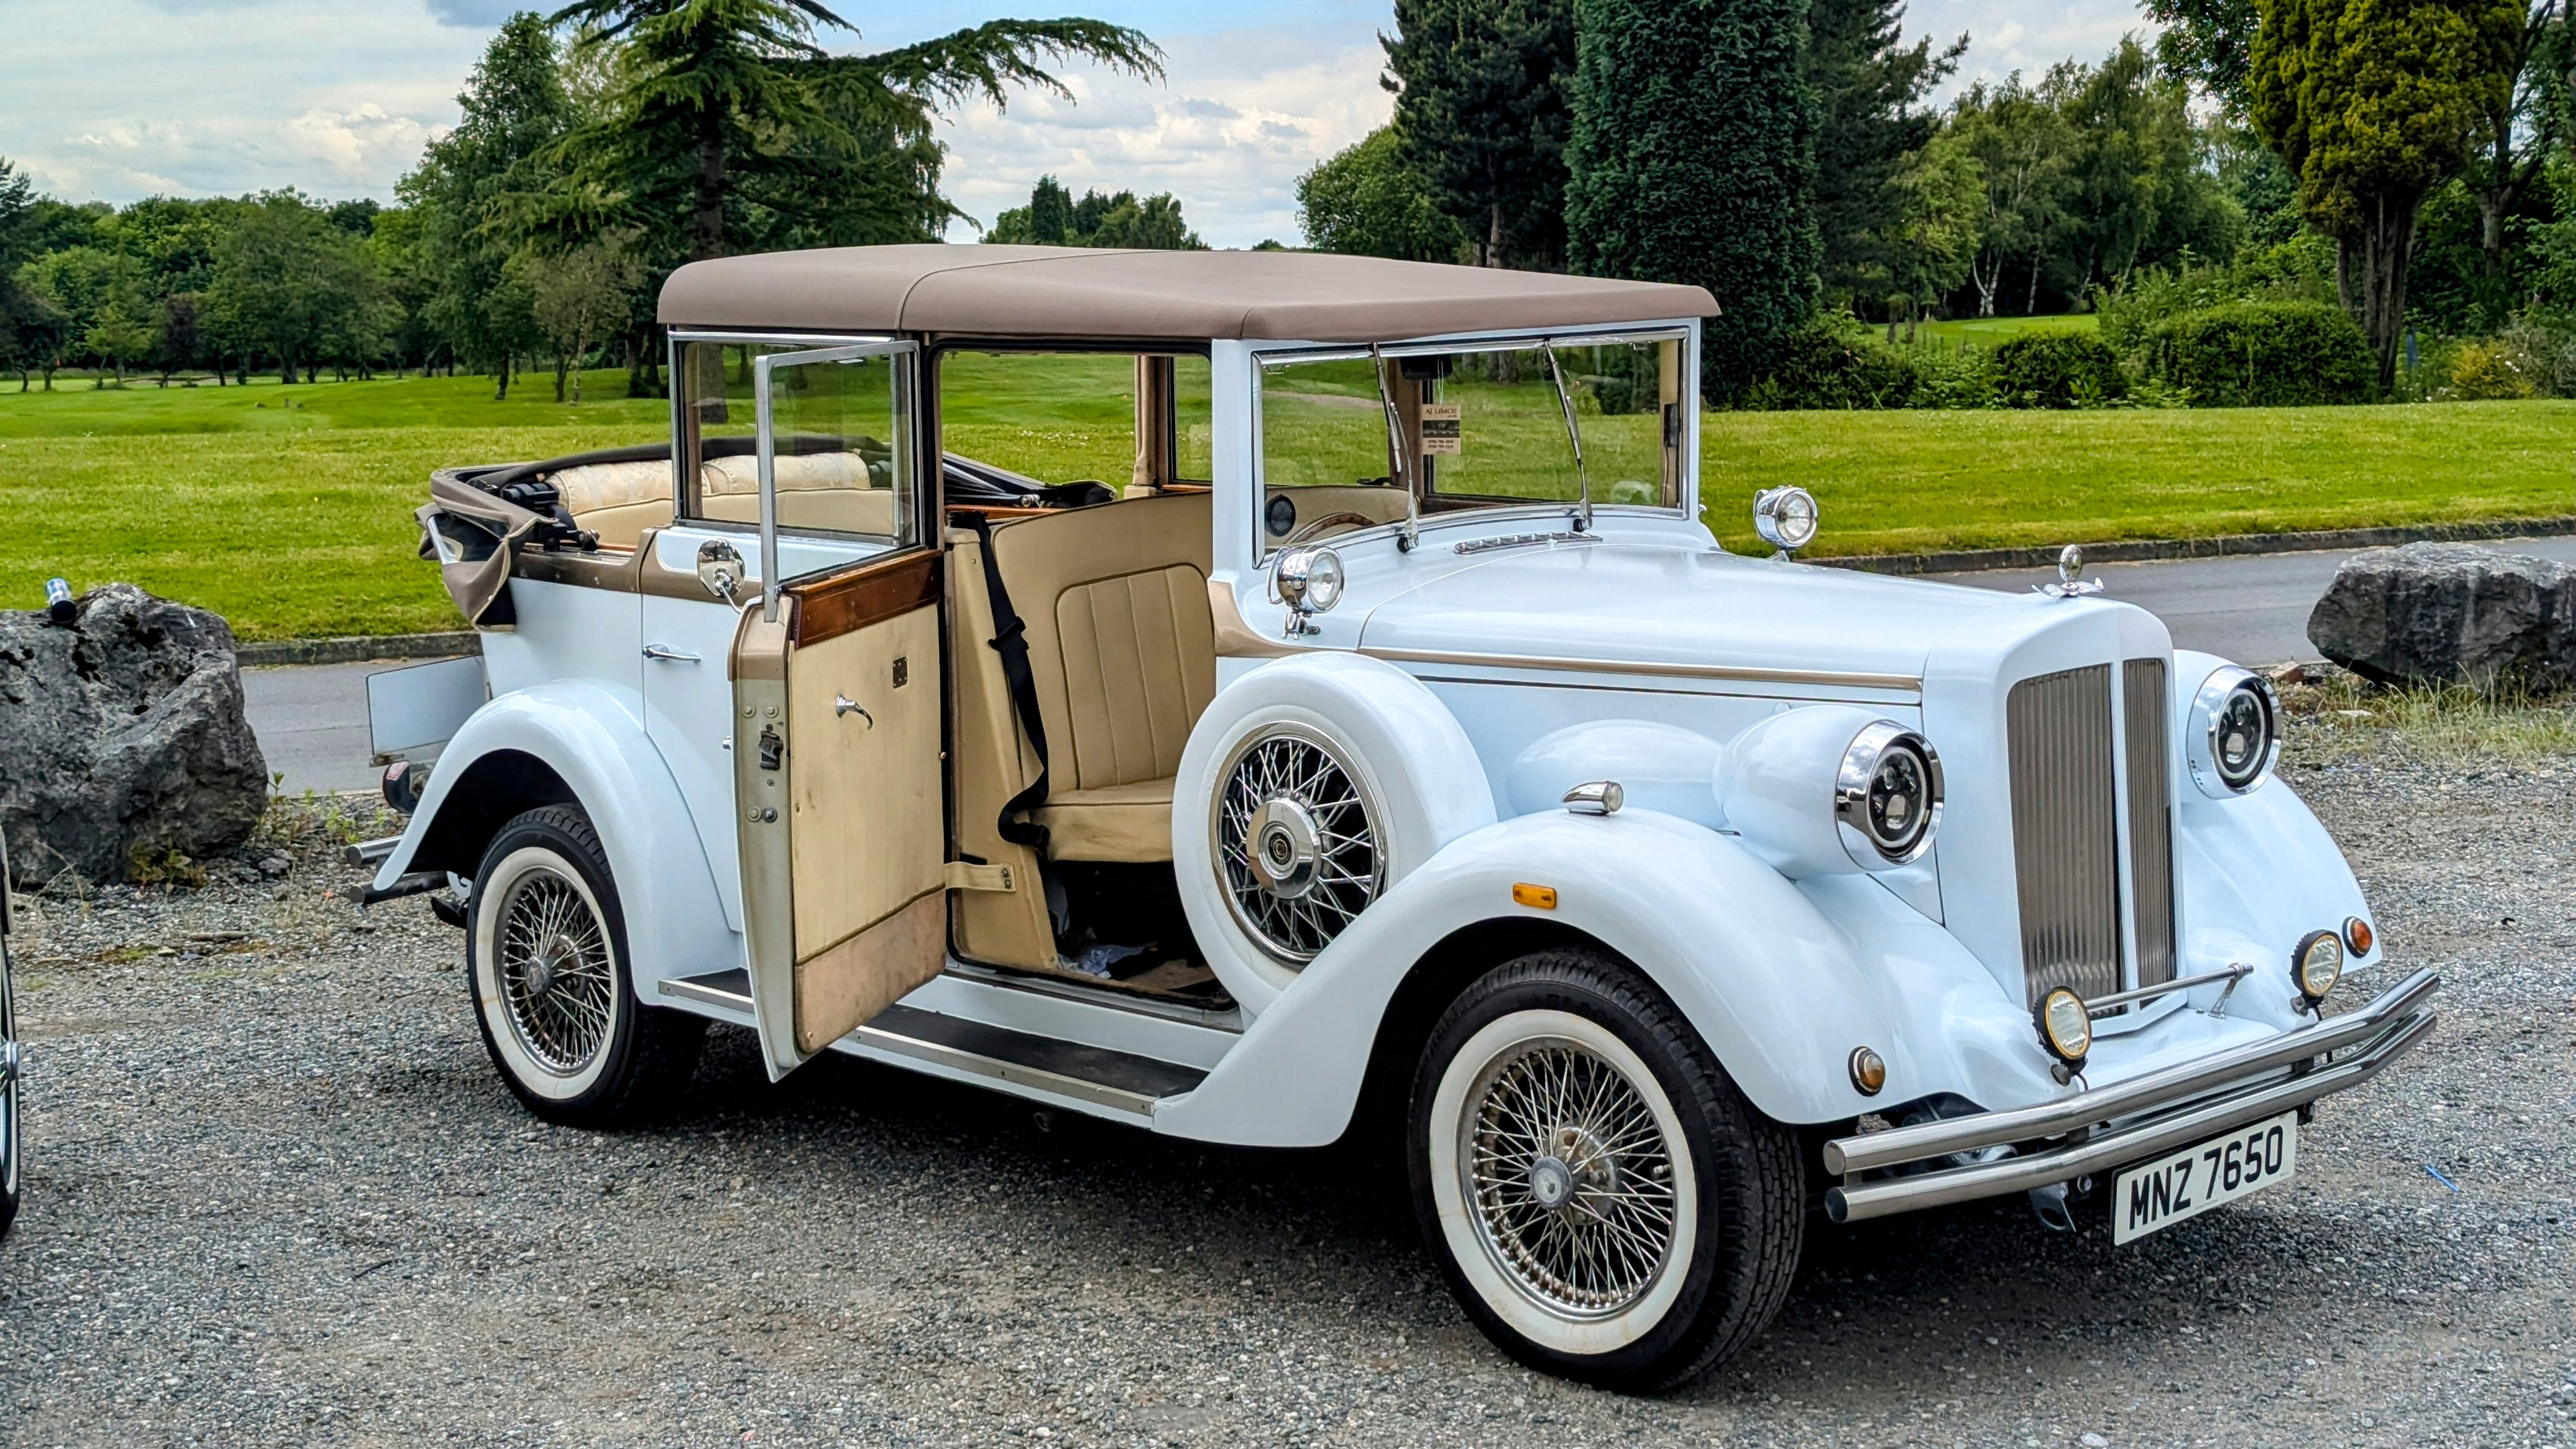 White Beauford with roof soft top roof down and front driver's door open showing a Cream leather interior